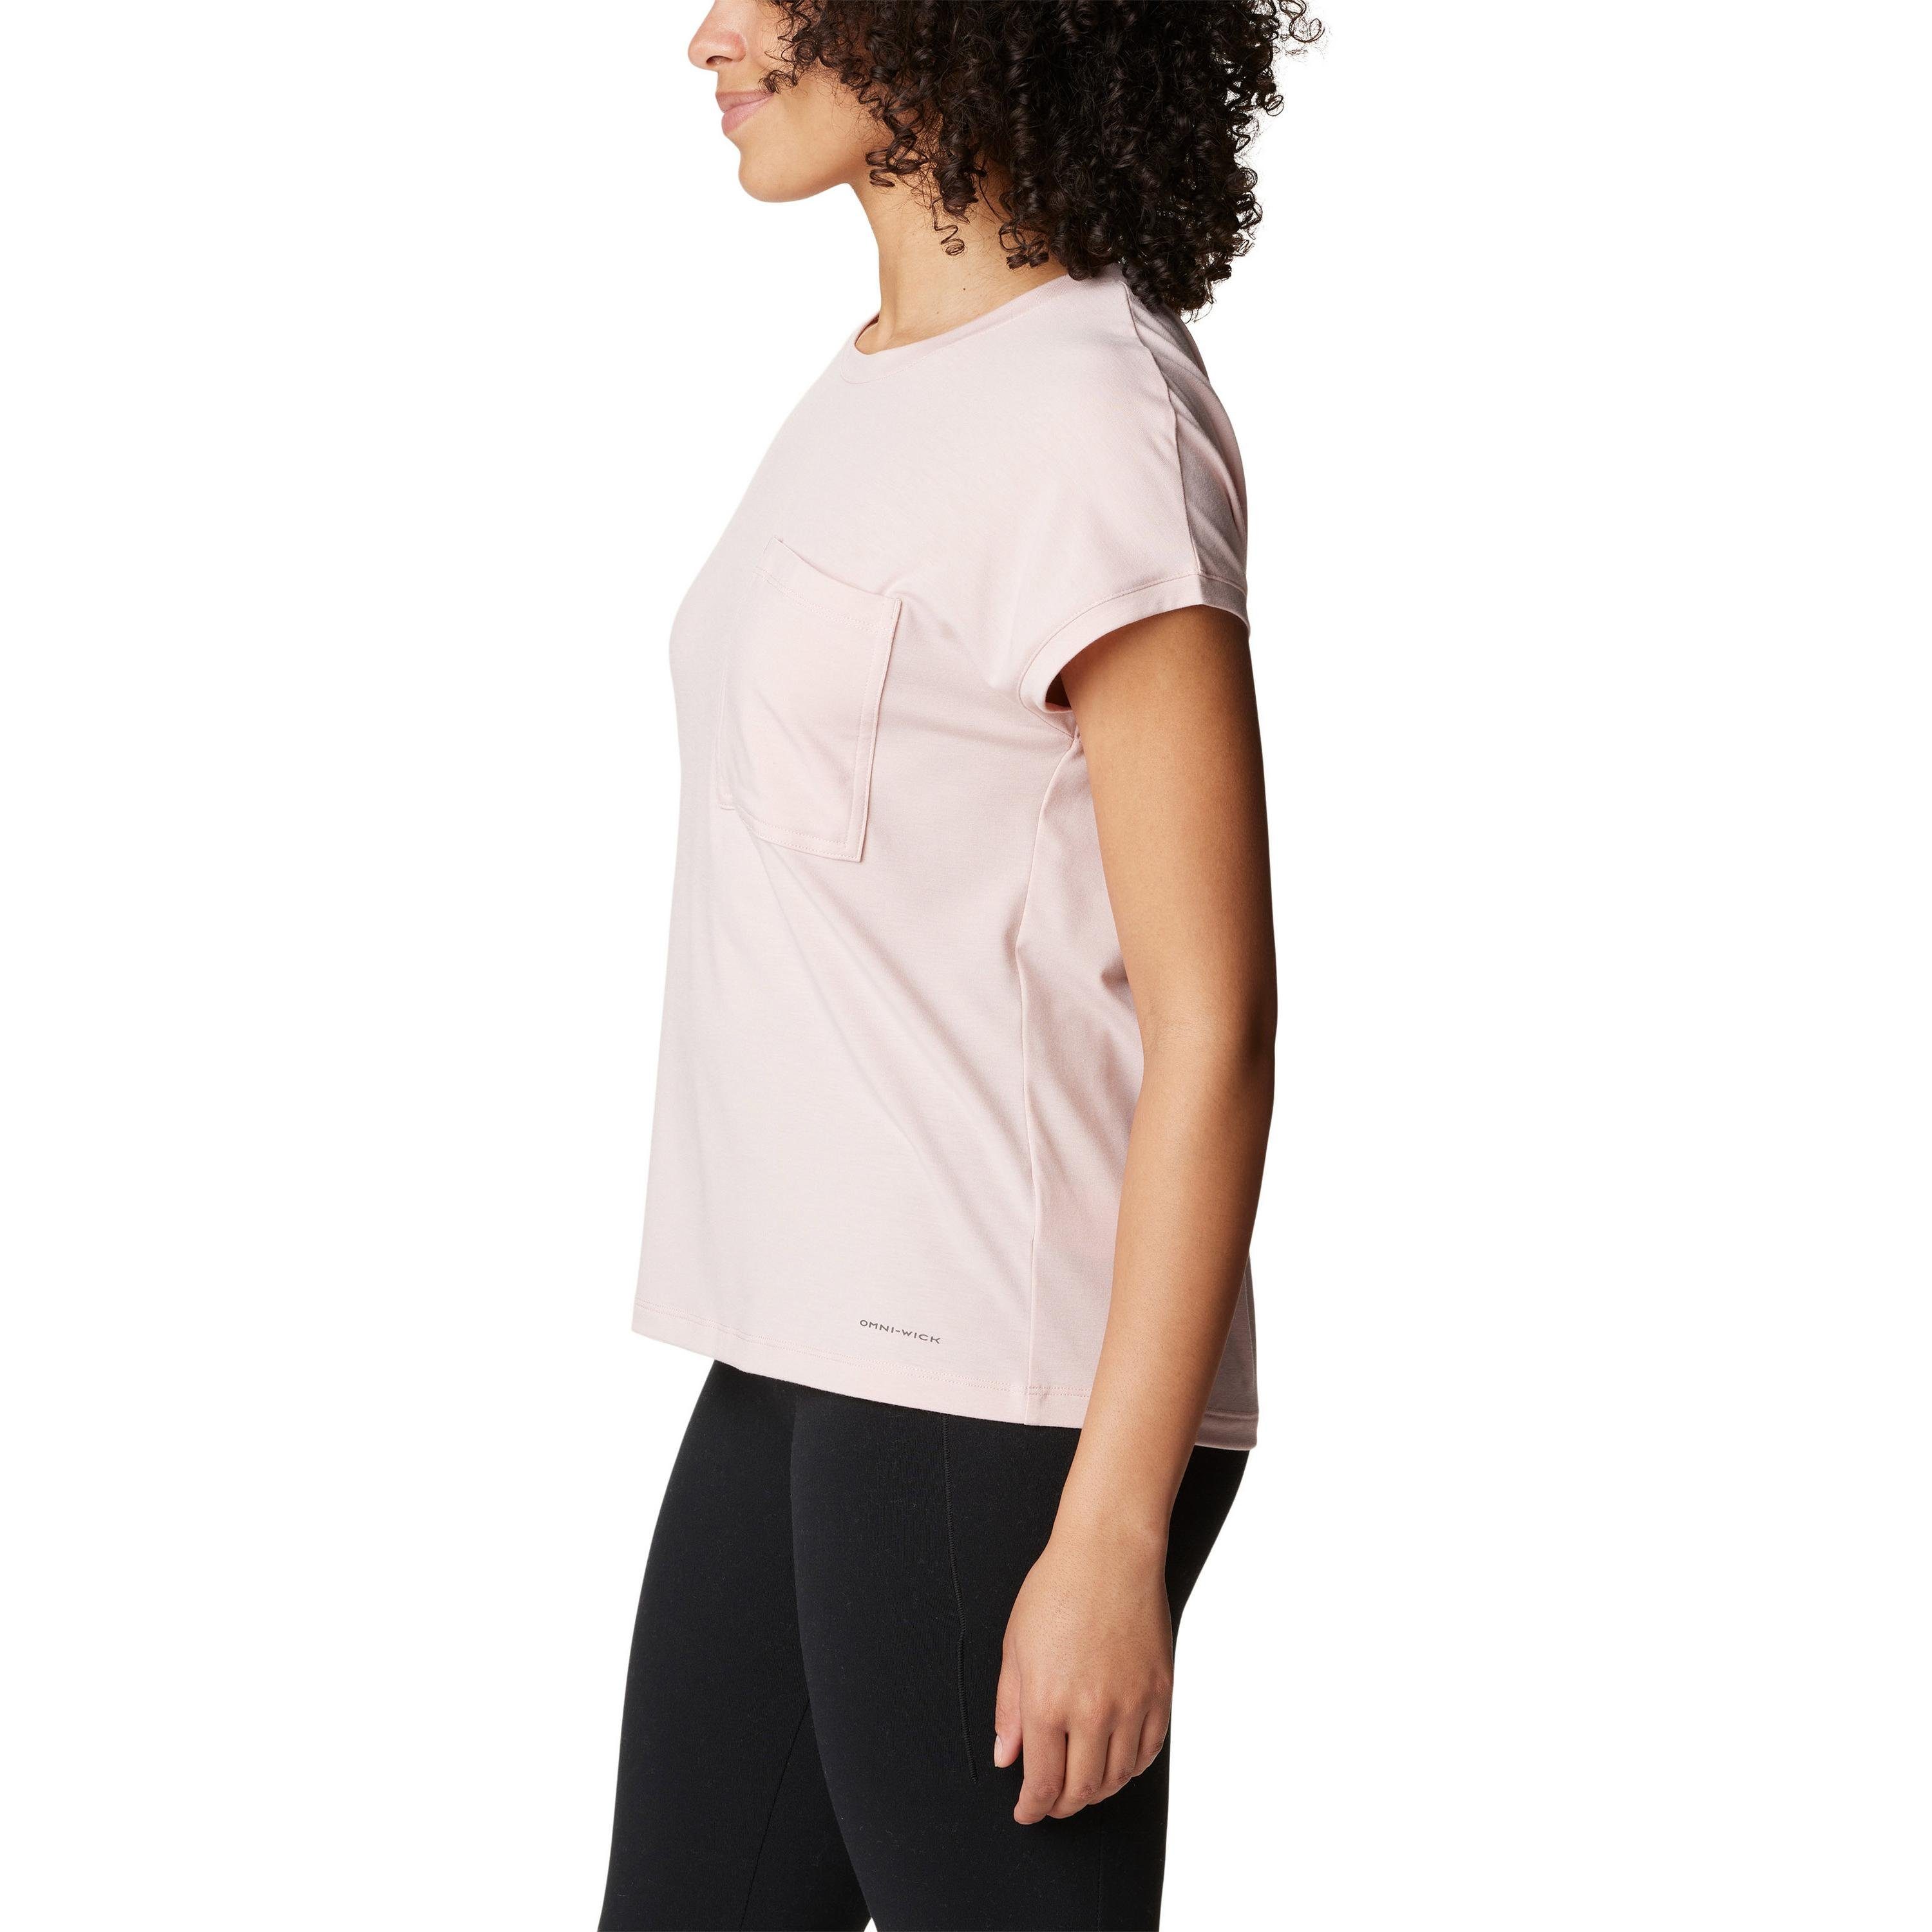 Columbia Funktionsshirt Boundless pink dusty